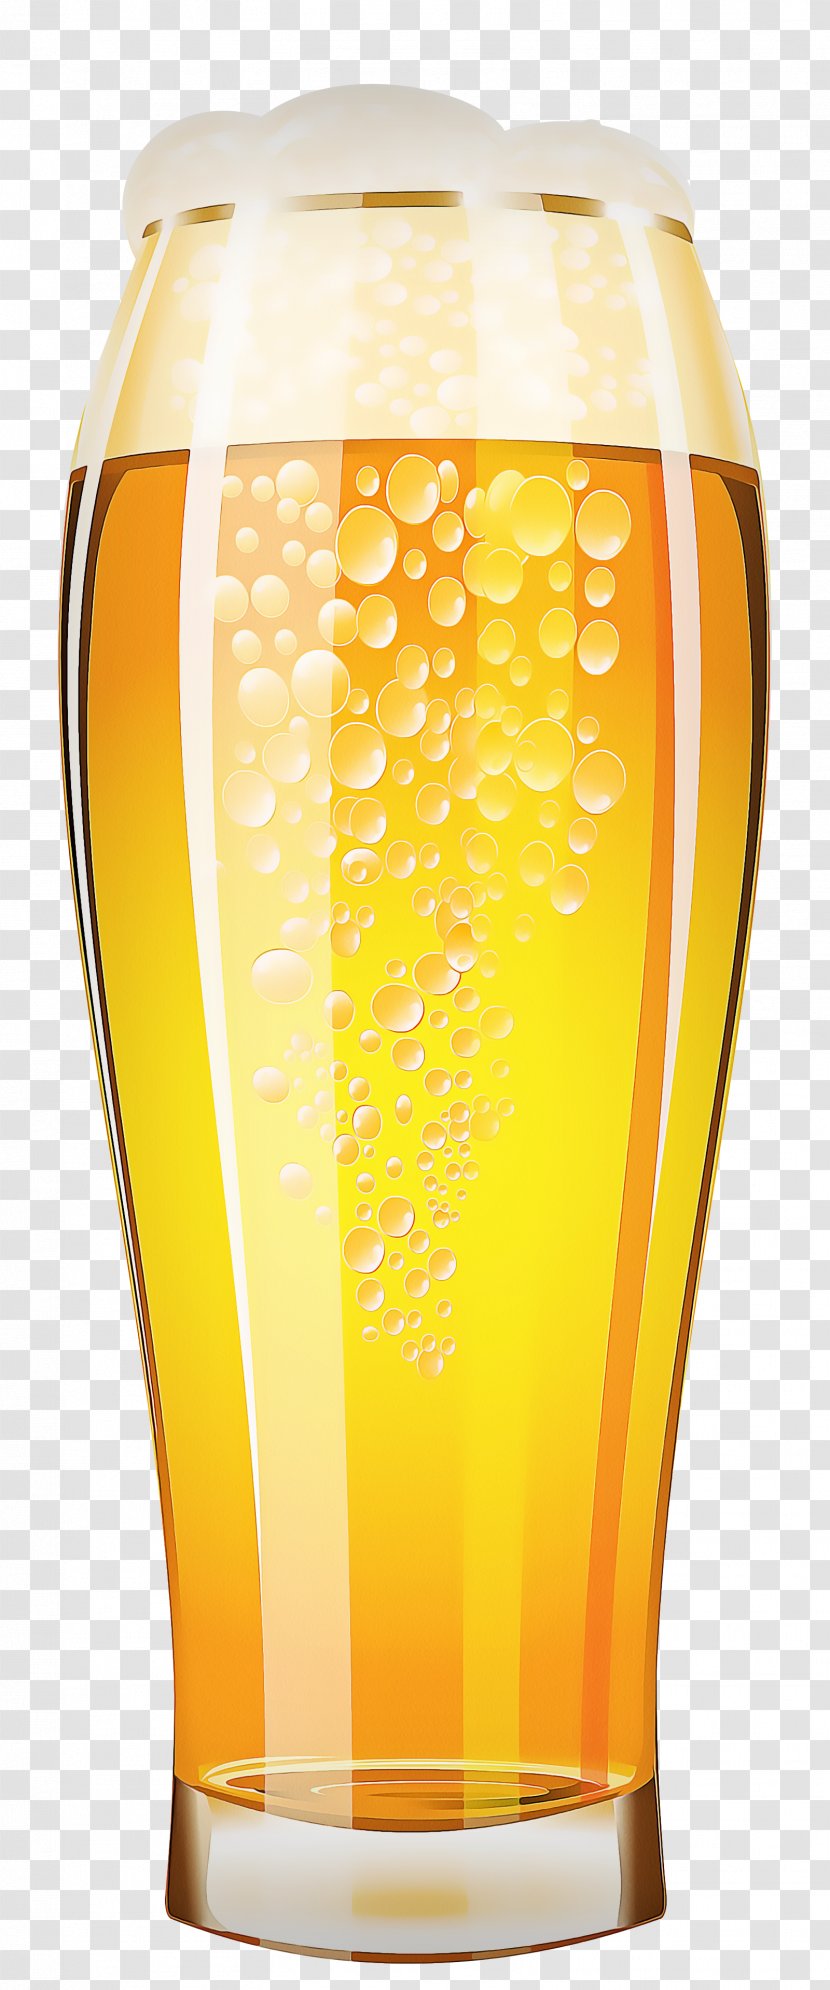 Champagne Glasses Background - Pint - Cocktail Wheat Beer Transparent PNG